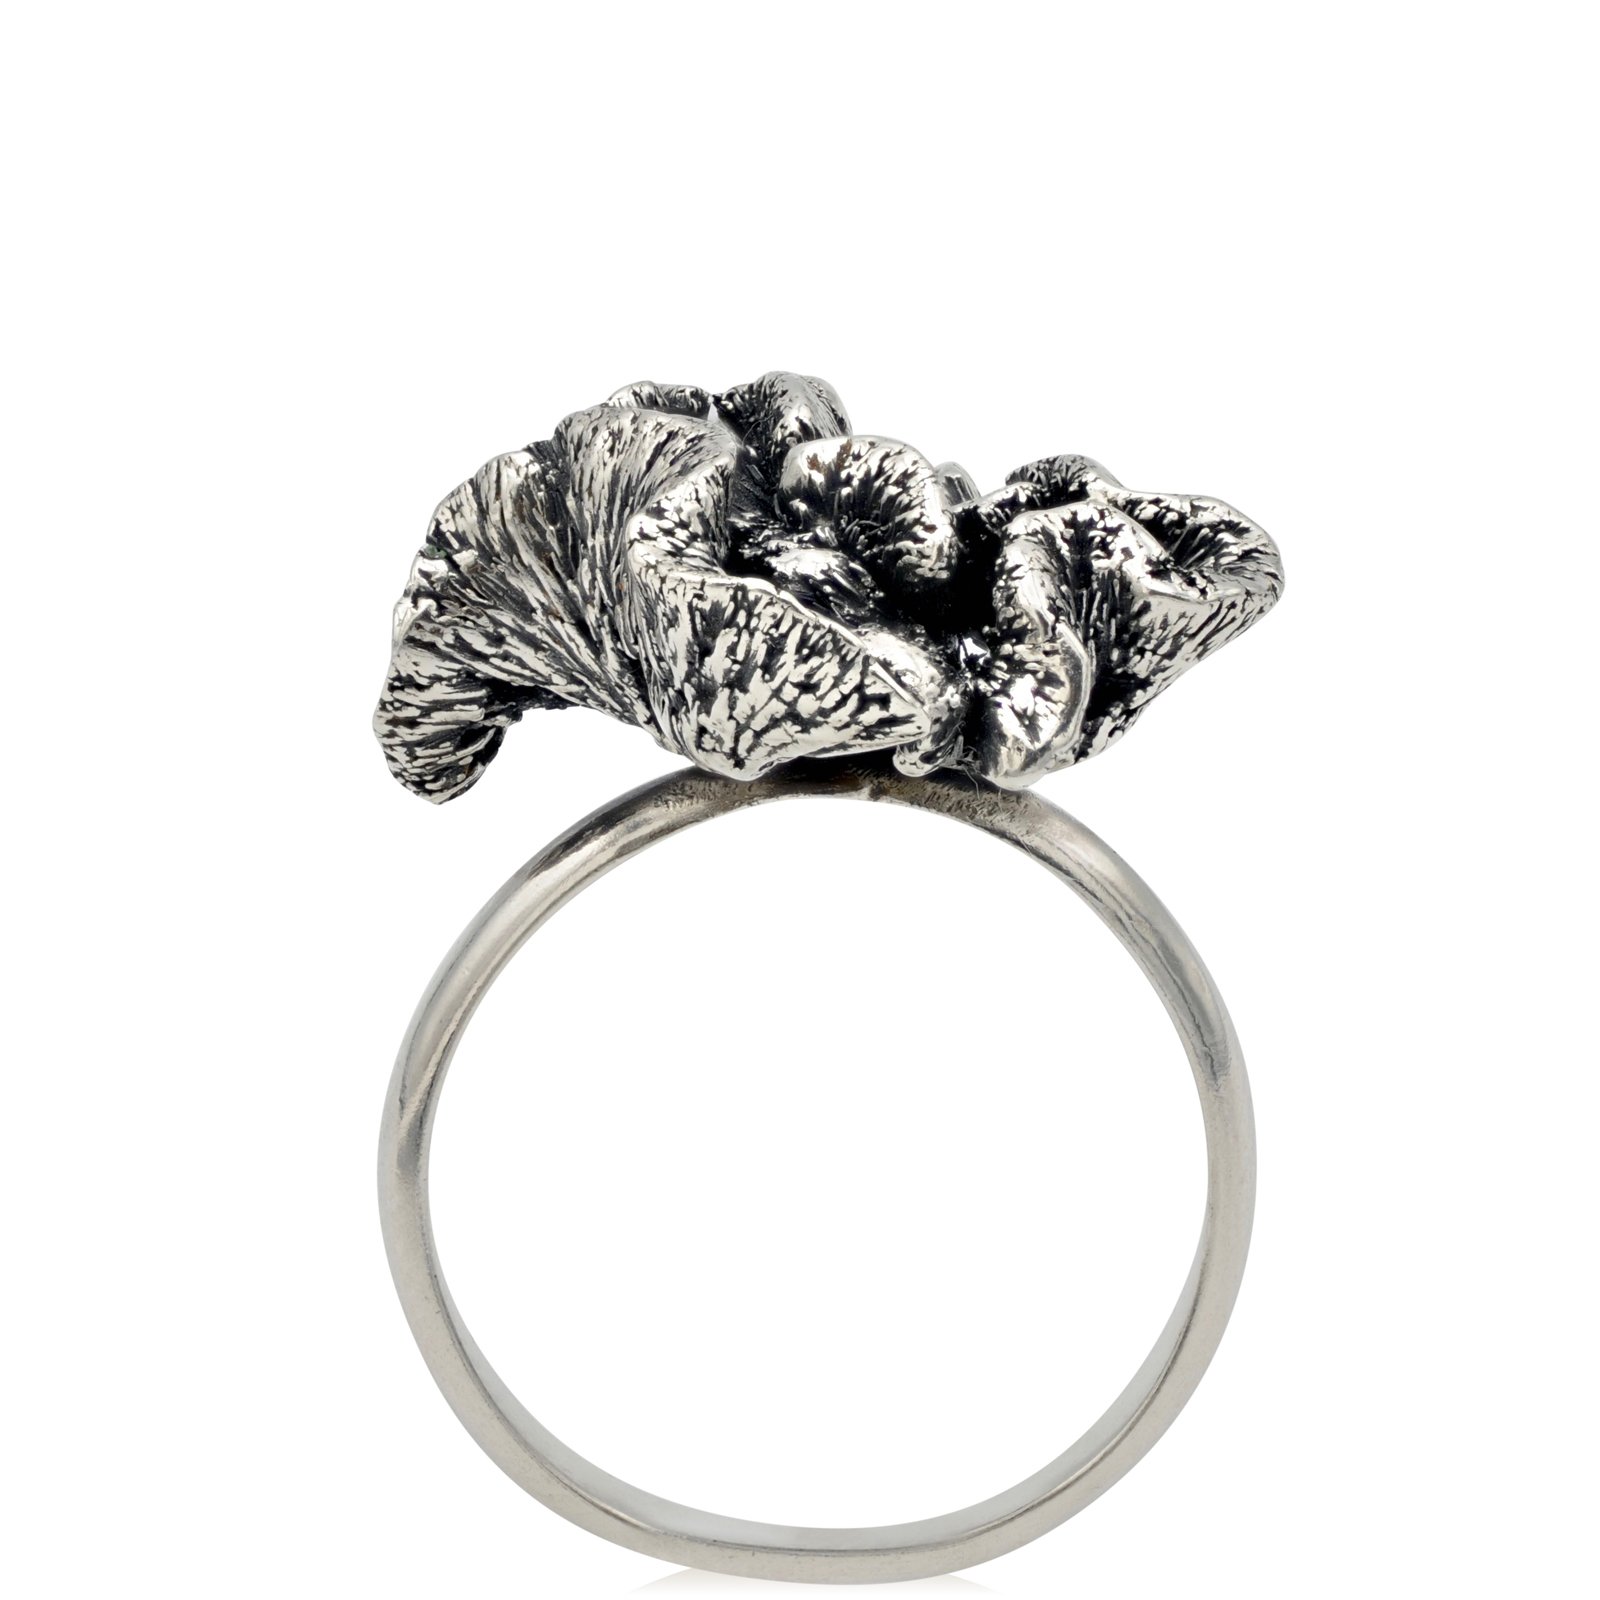 cockscombs-antiqued-sterling-silver-ring-1.jpg